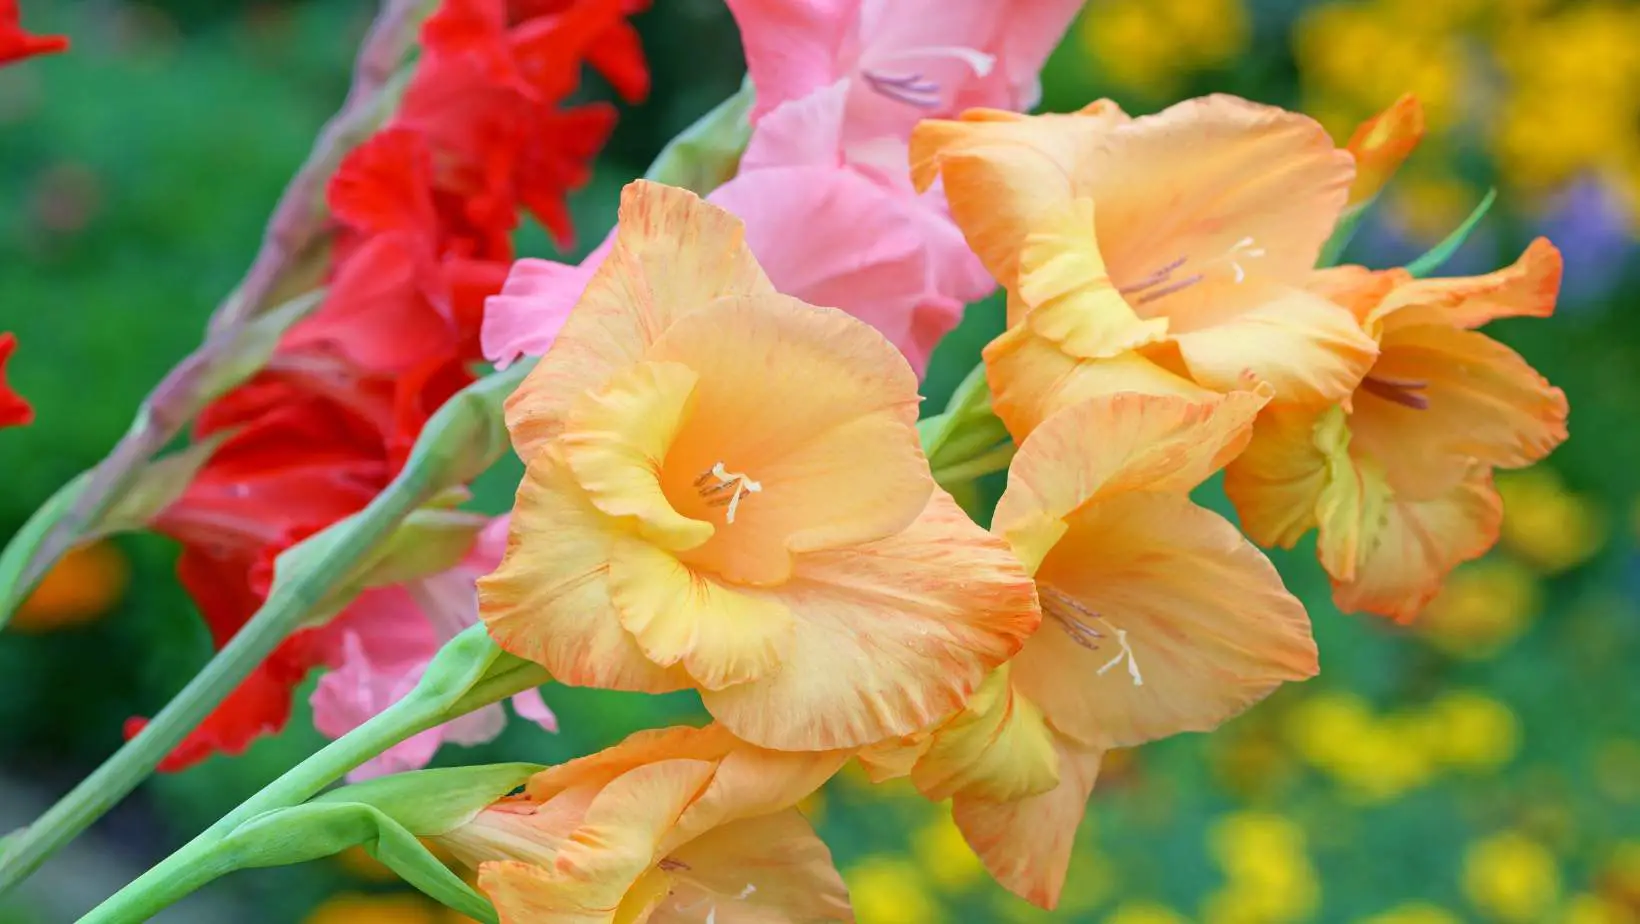 Are Gladiolus Poisonous to Cats?